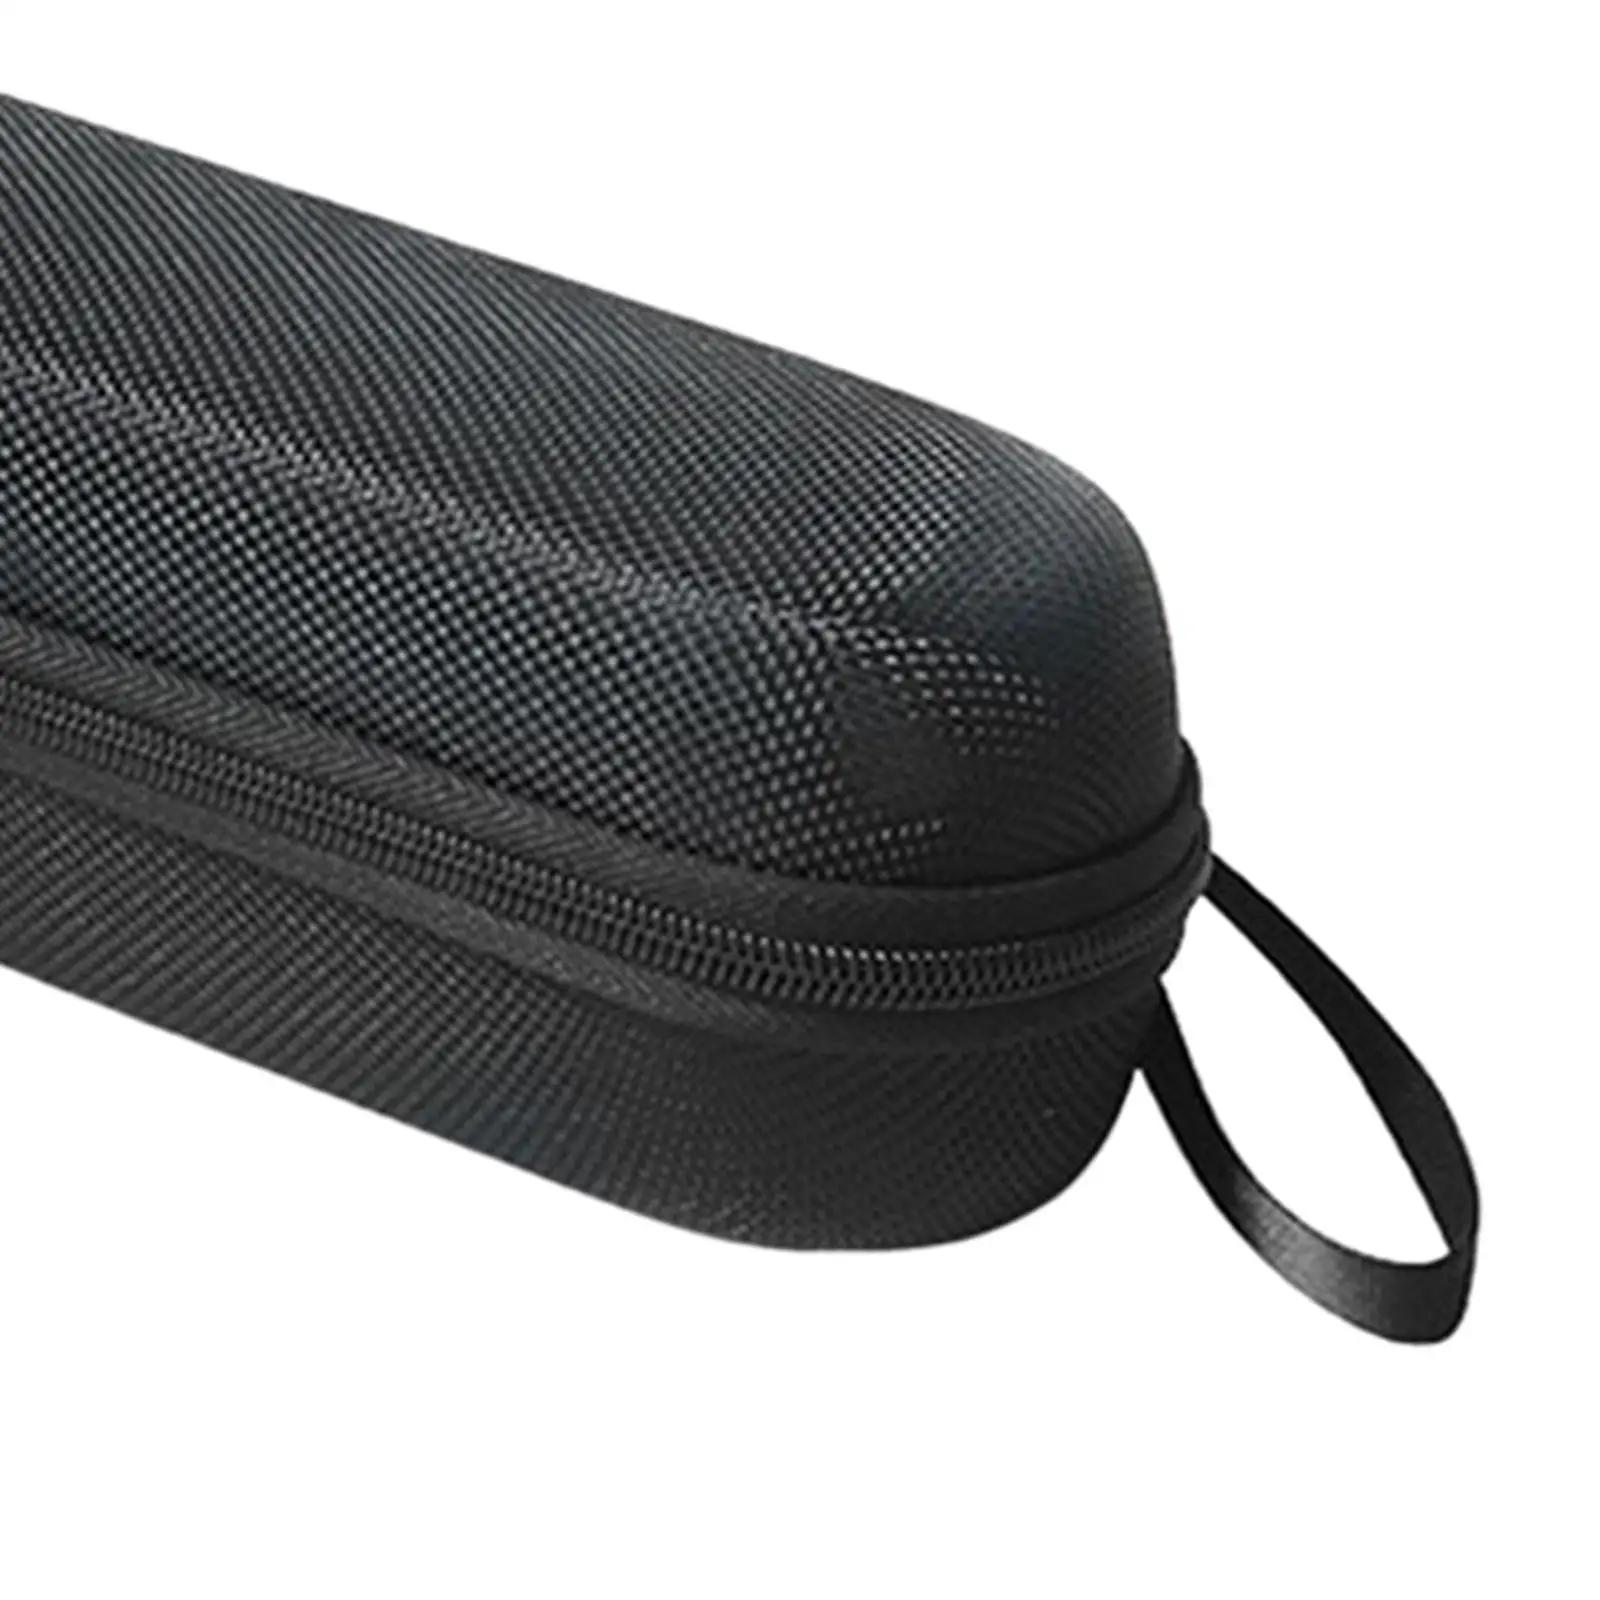 Toothbrush Travel Case Shockproof Portable Fits Most Electric Toothbrush Convenient Dustproof 278x70x70mm Toothbrush Storage Bag